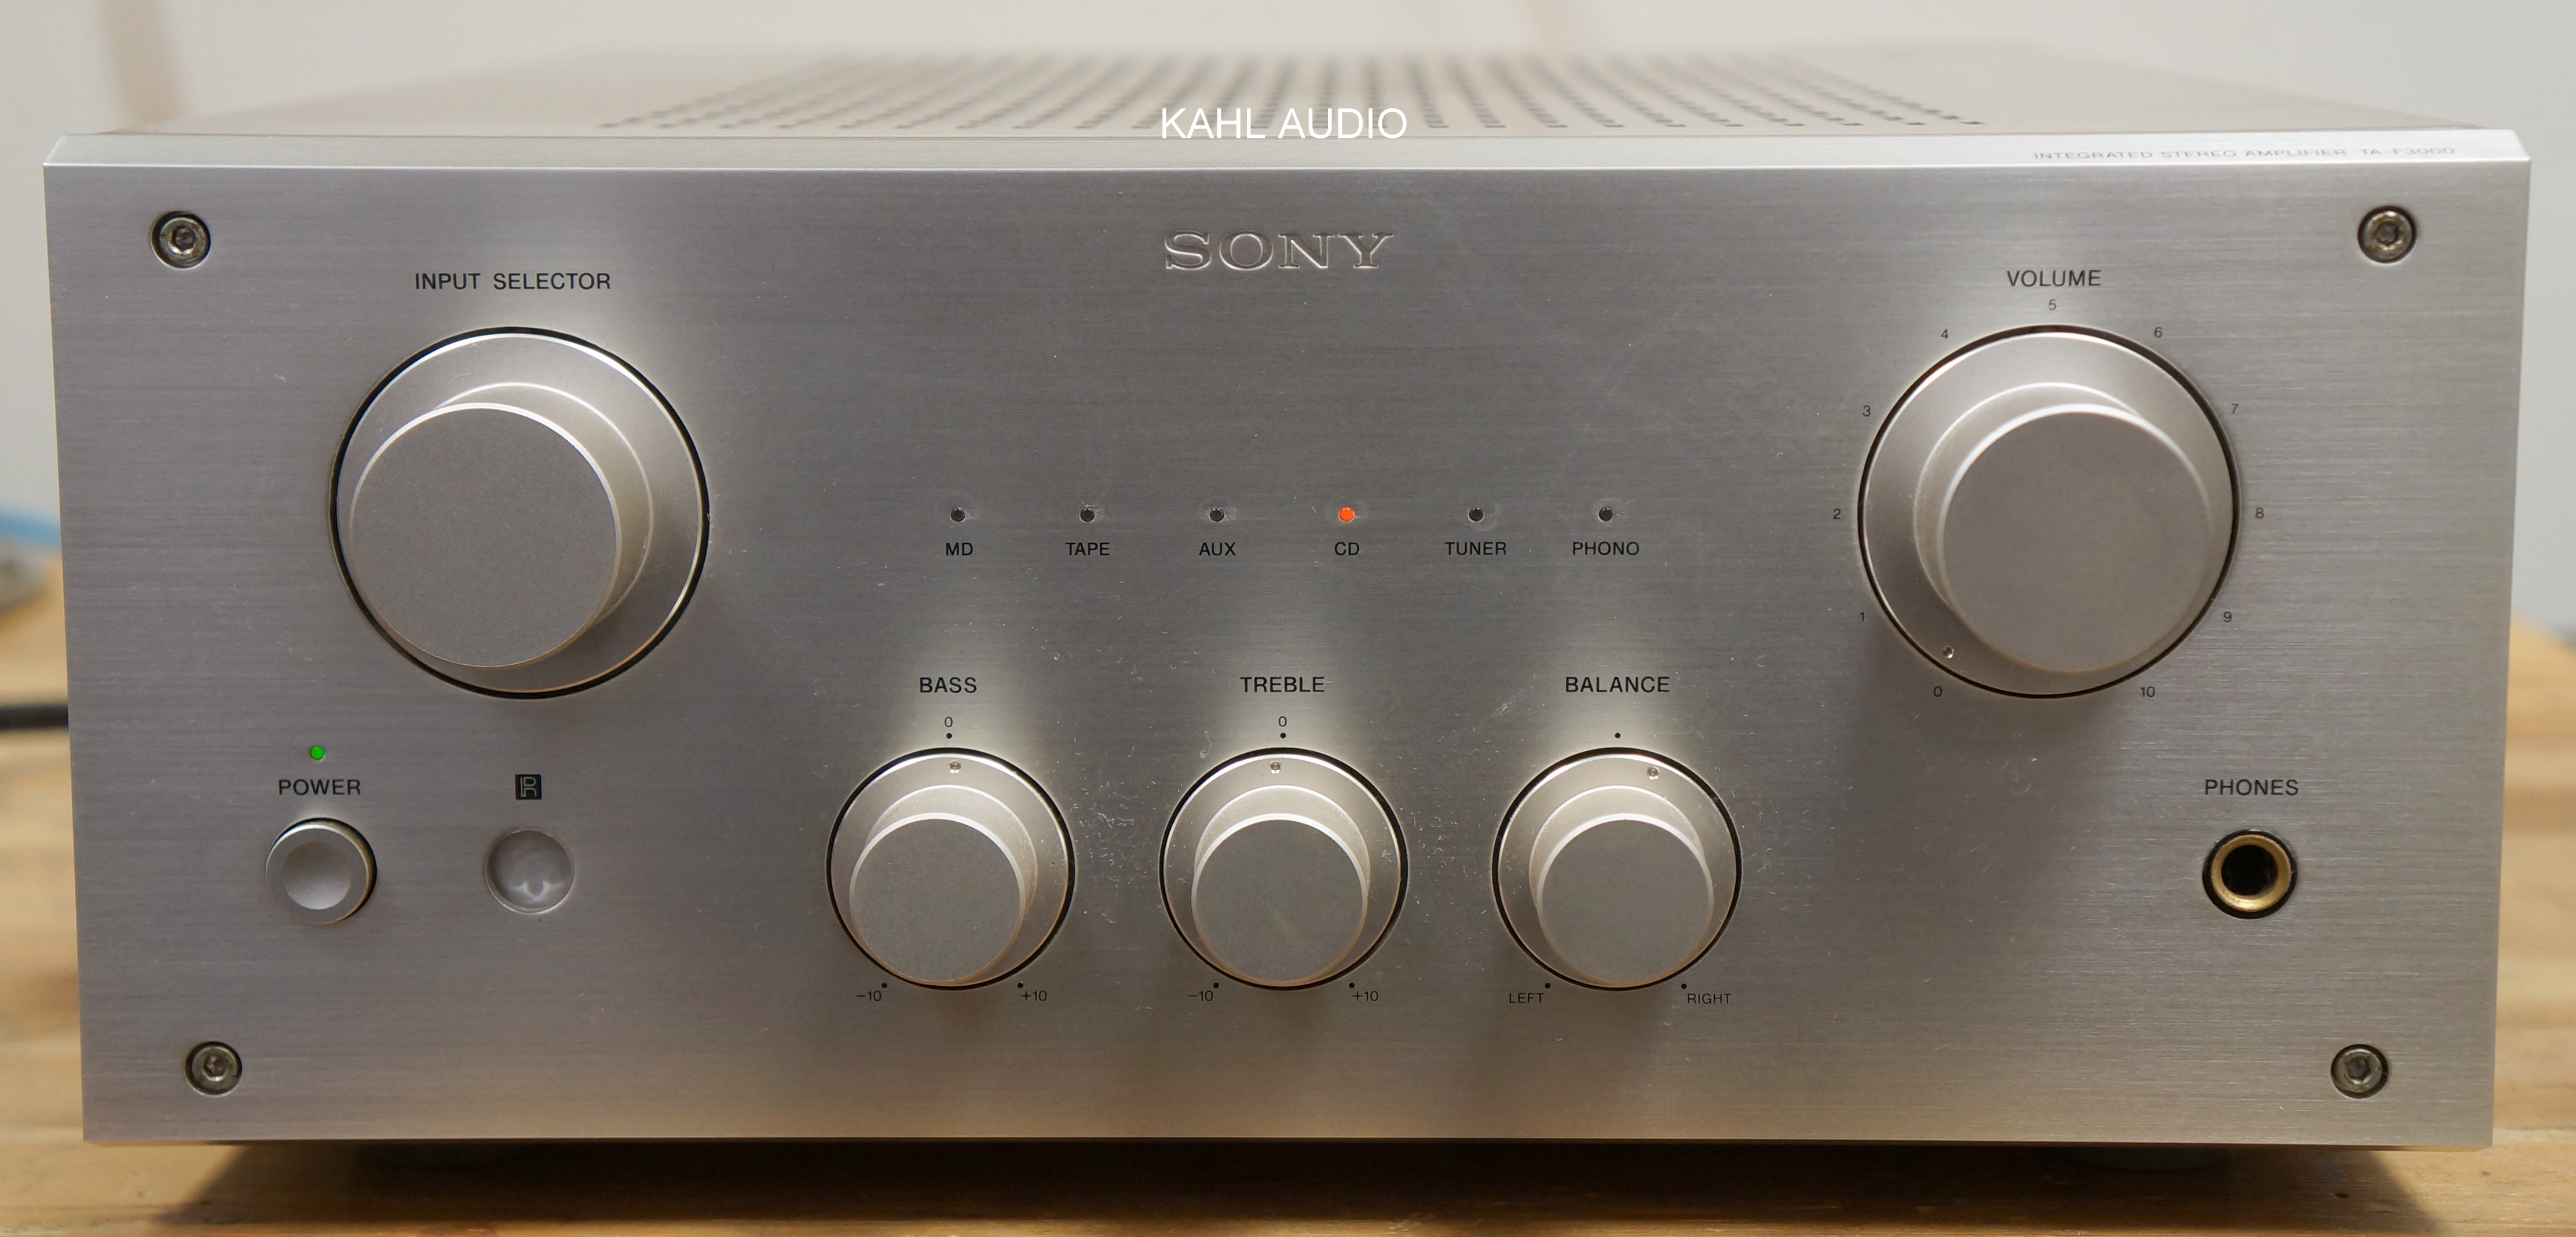 SONY TA-F3000 Integrated amp. JDM 100V special! RARE. $1,000 MSRP